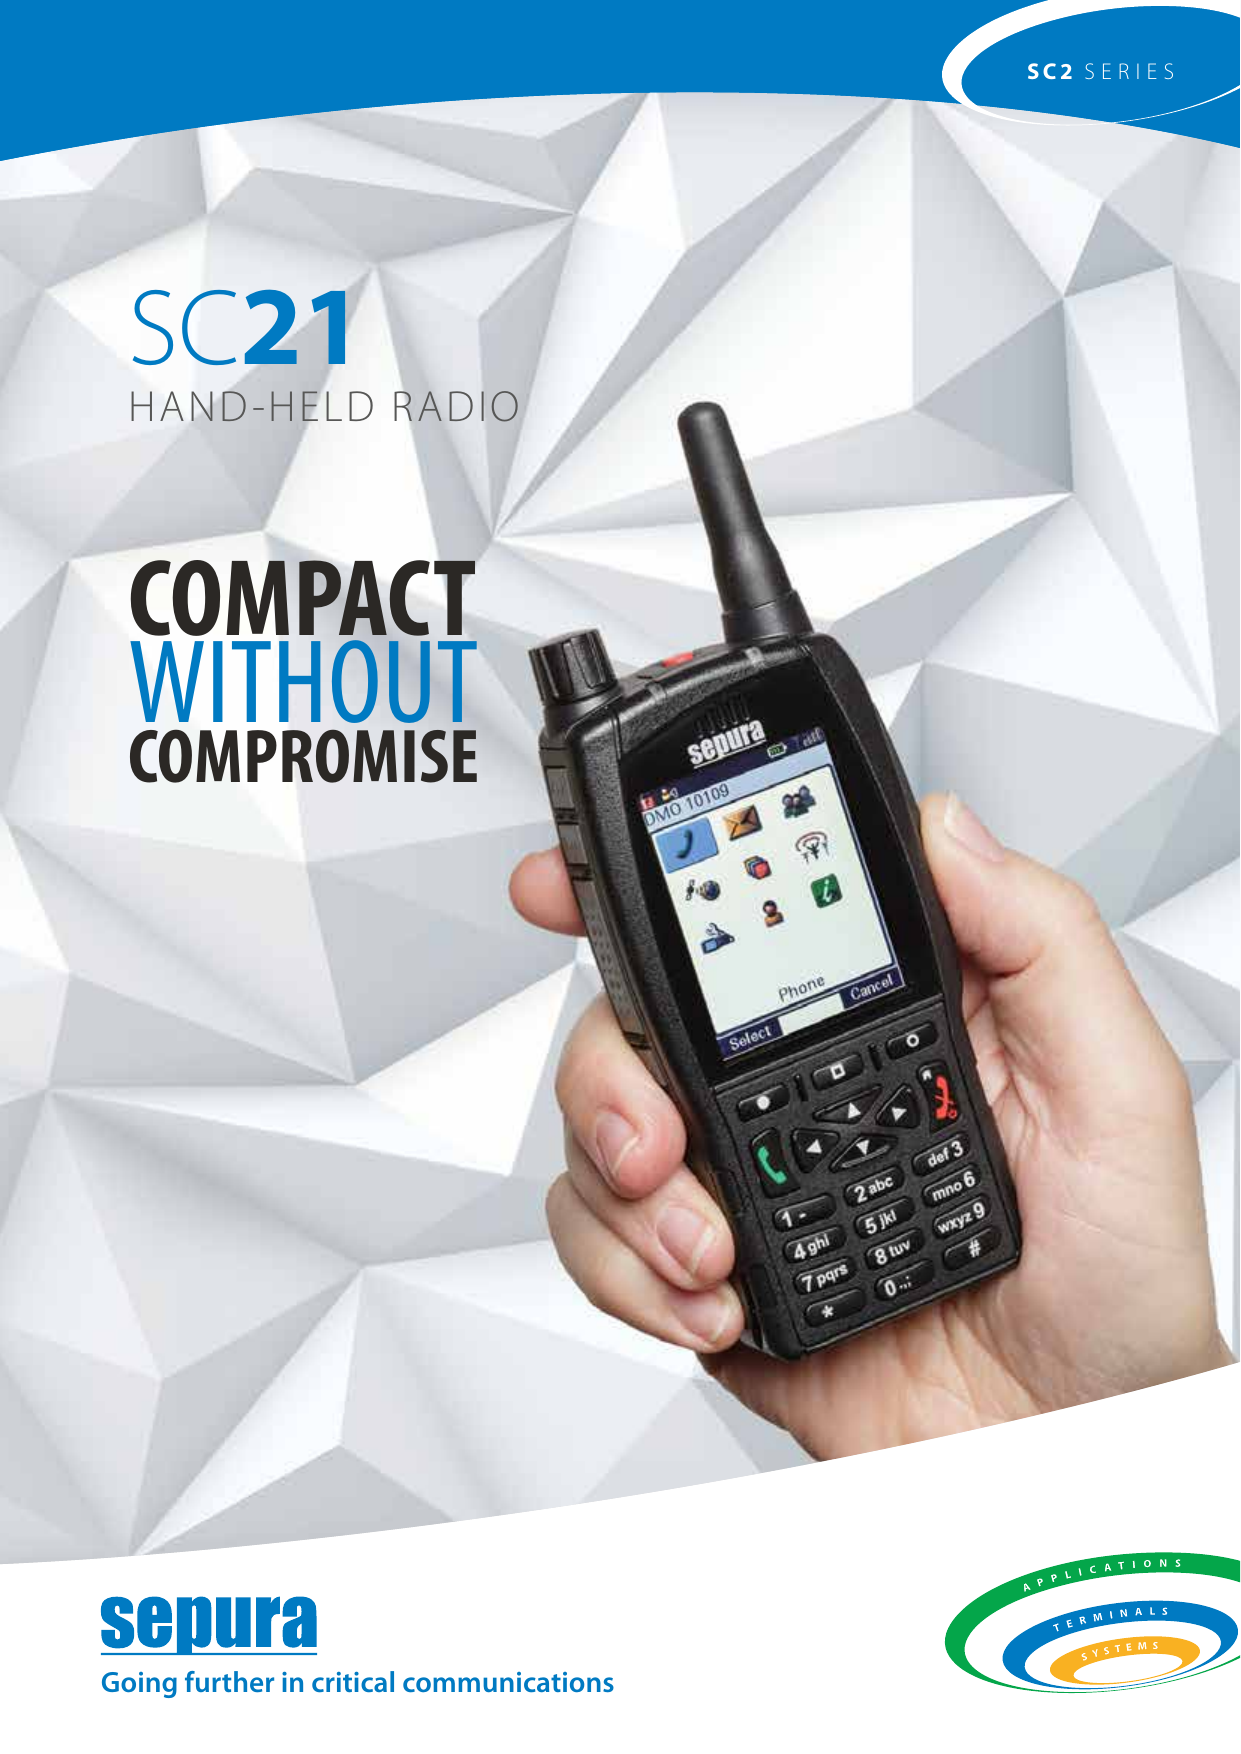 Going further in critical communicationsCOMPACT WITHOUTCOMPROMISEHAND-HELD RADIOSC2  SERIESSC21 